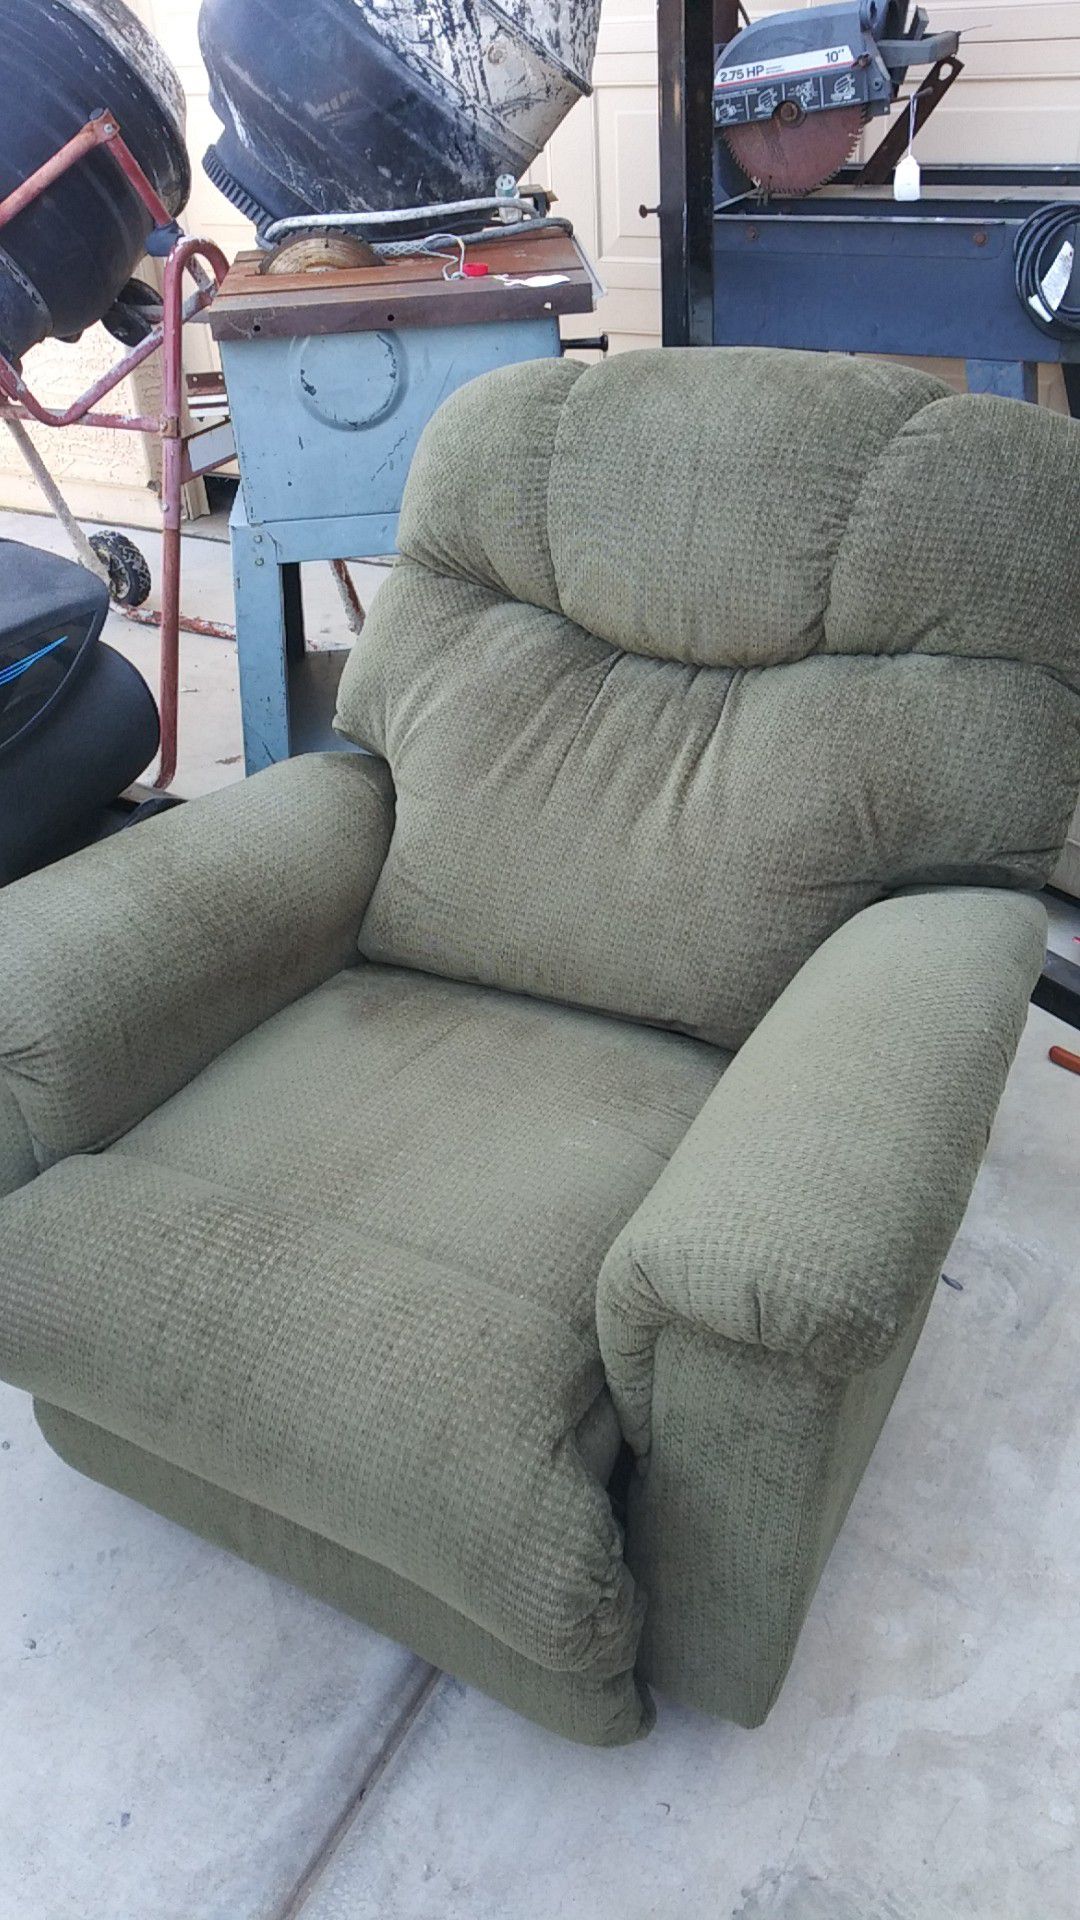 Recliner olive green excellent condition looks barely used and comfy !